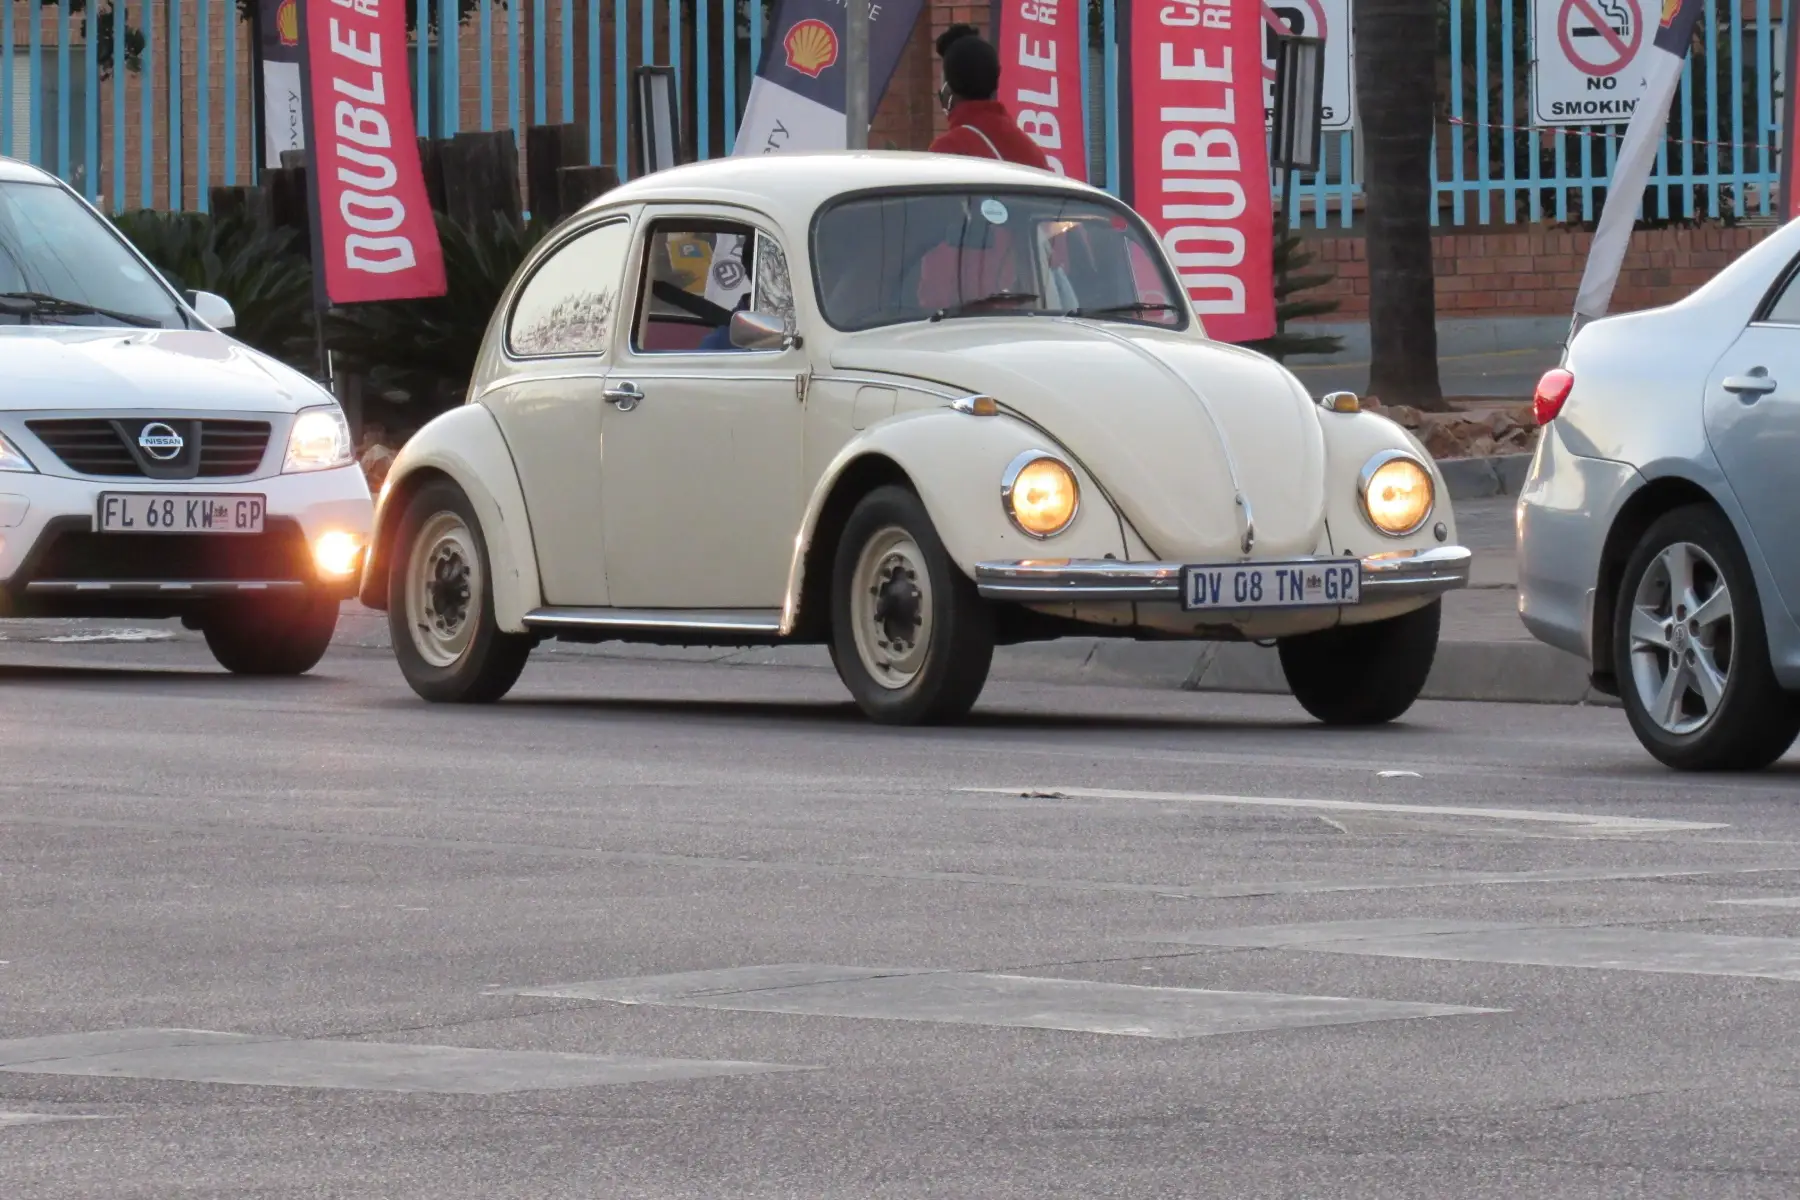 old volkswagen with South African licence plates on street